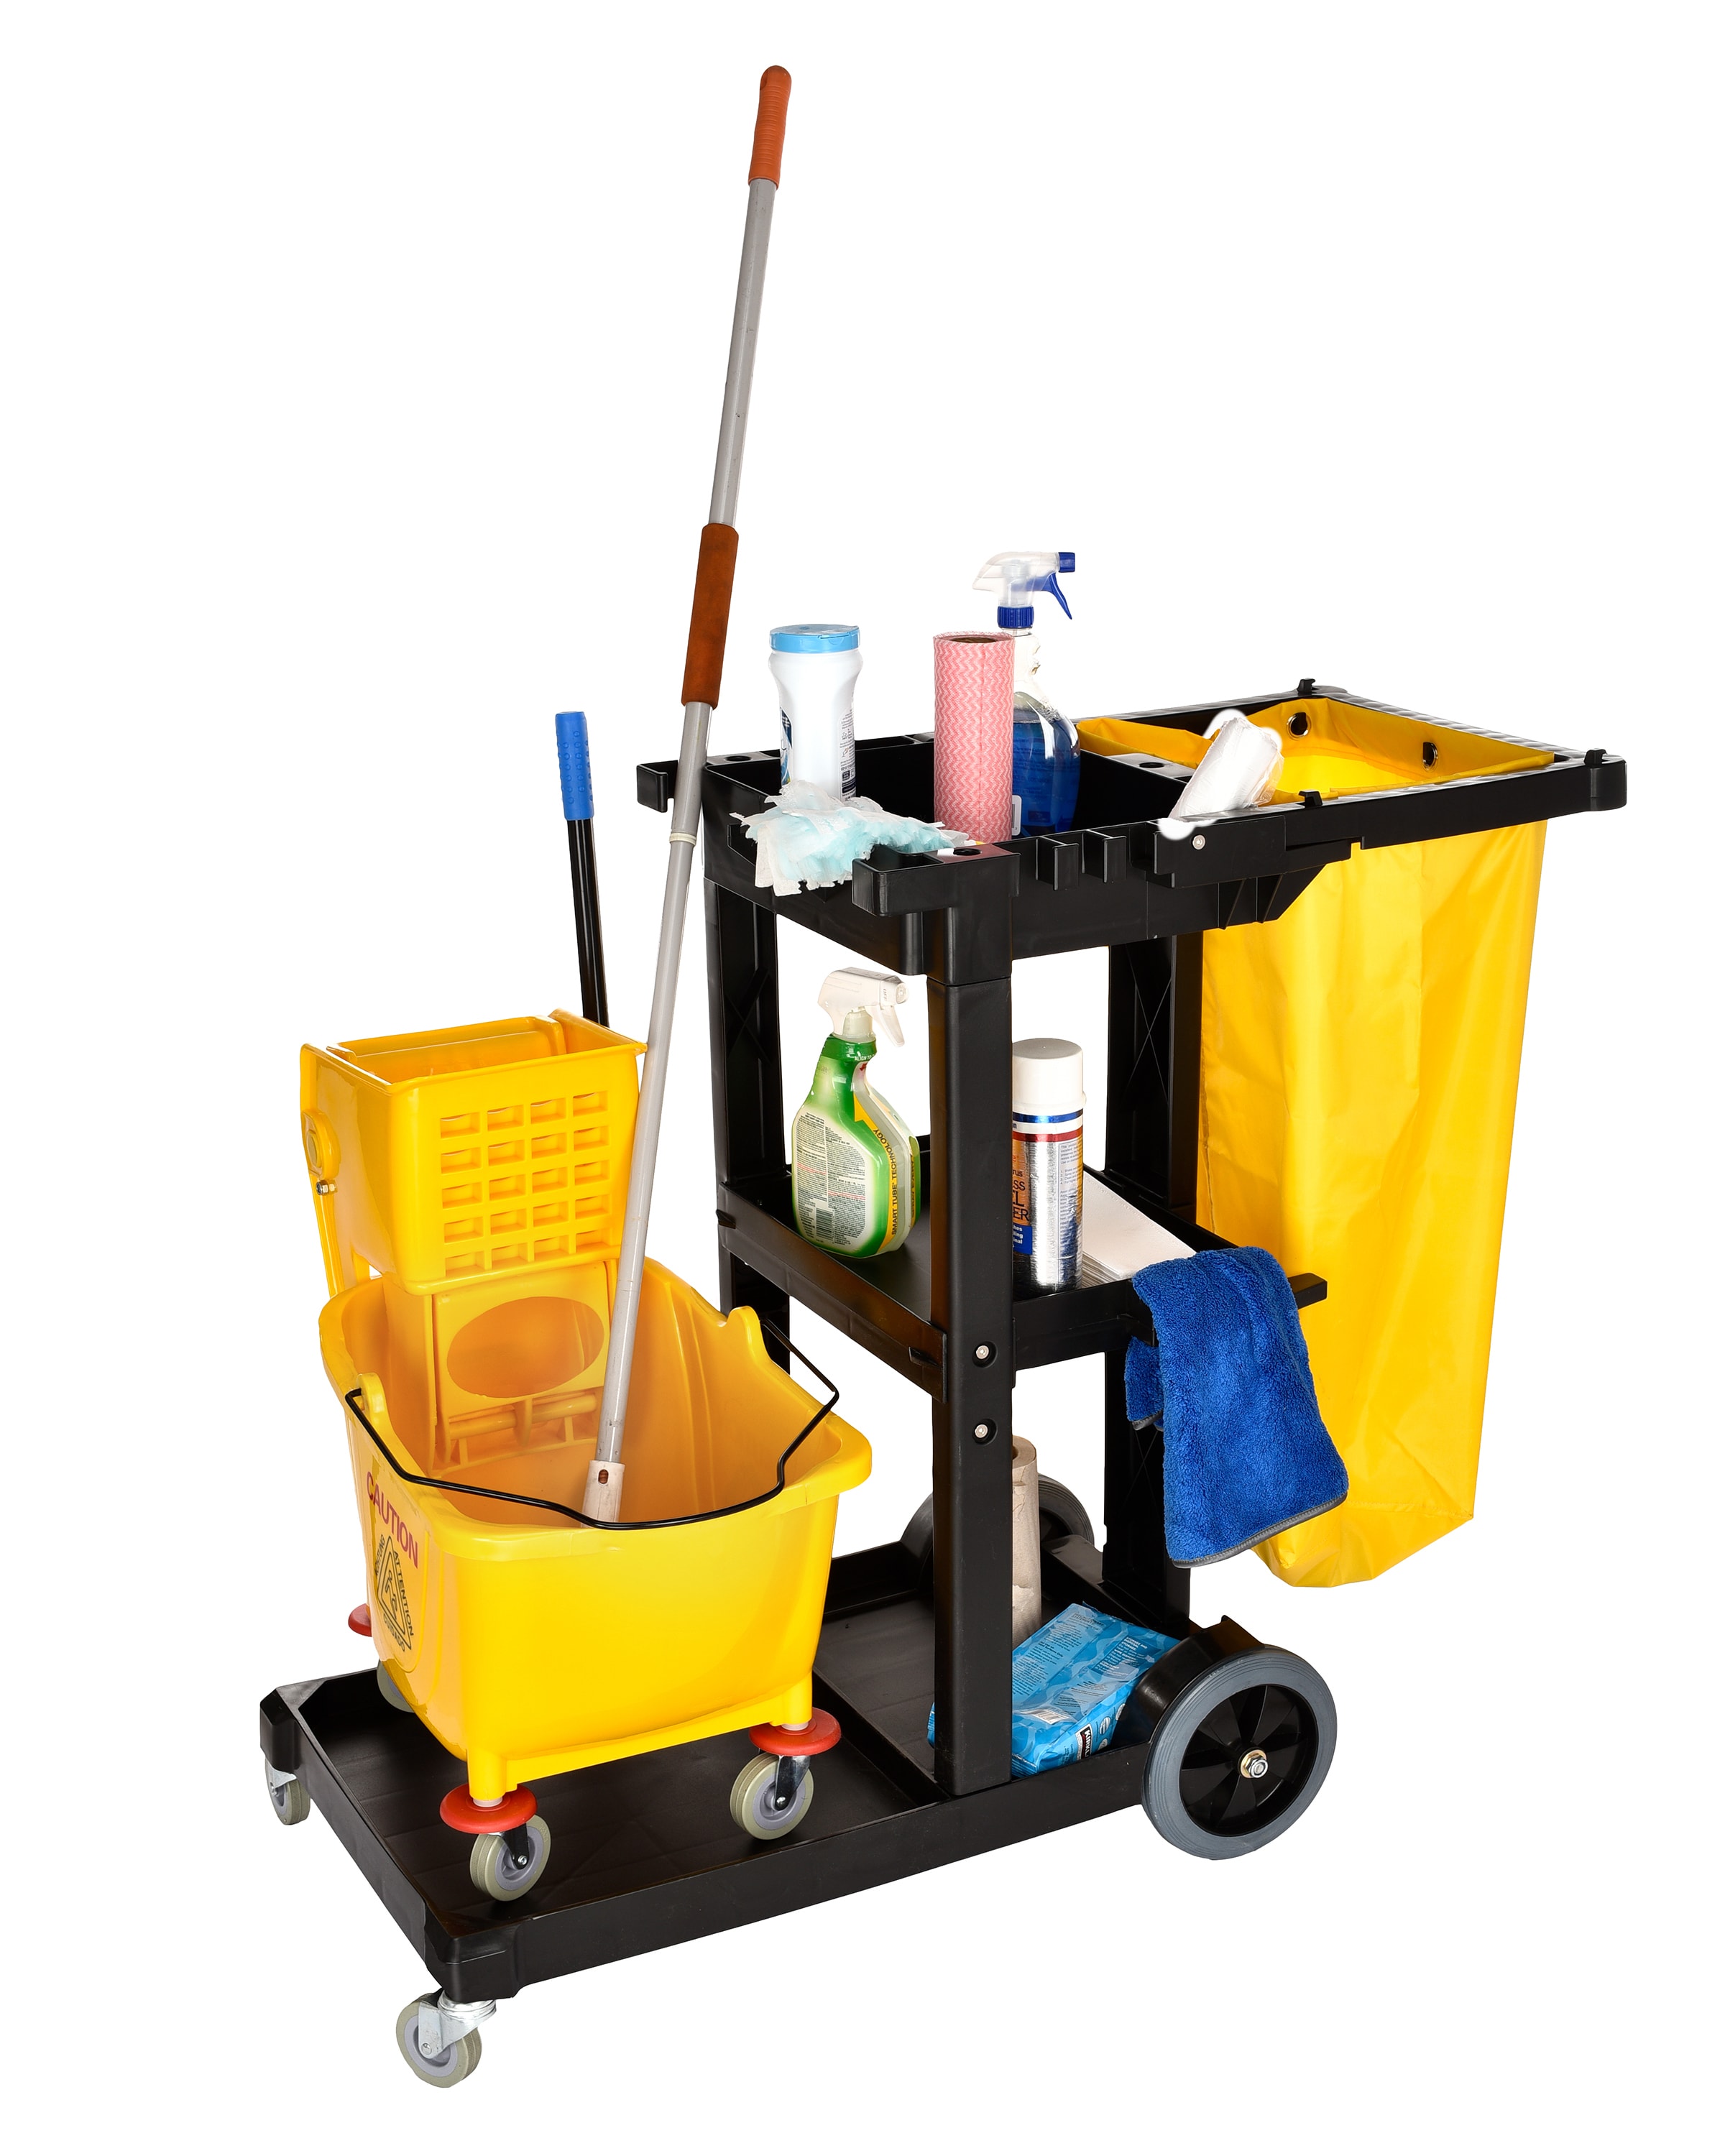 Lavex Premium 3-Shelf Janitor Cart Kit with Yellow Zippered Bag, Lid, and  Double Lock Box